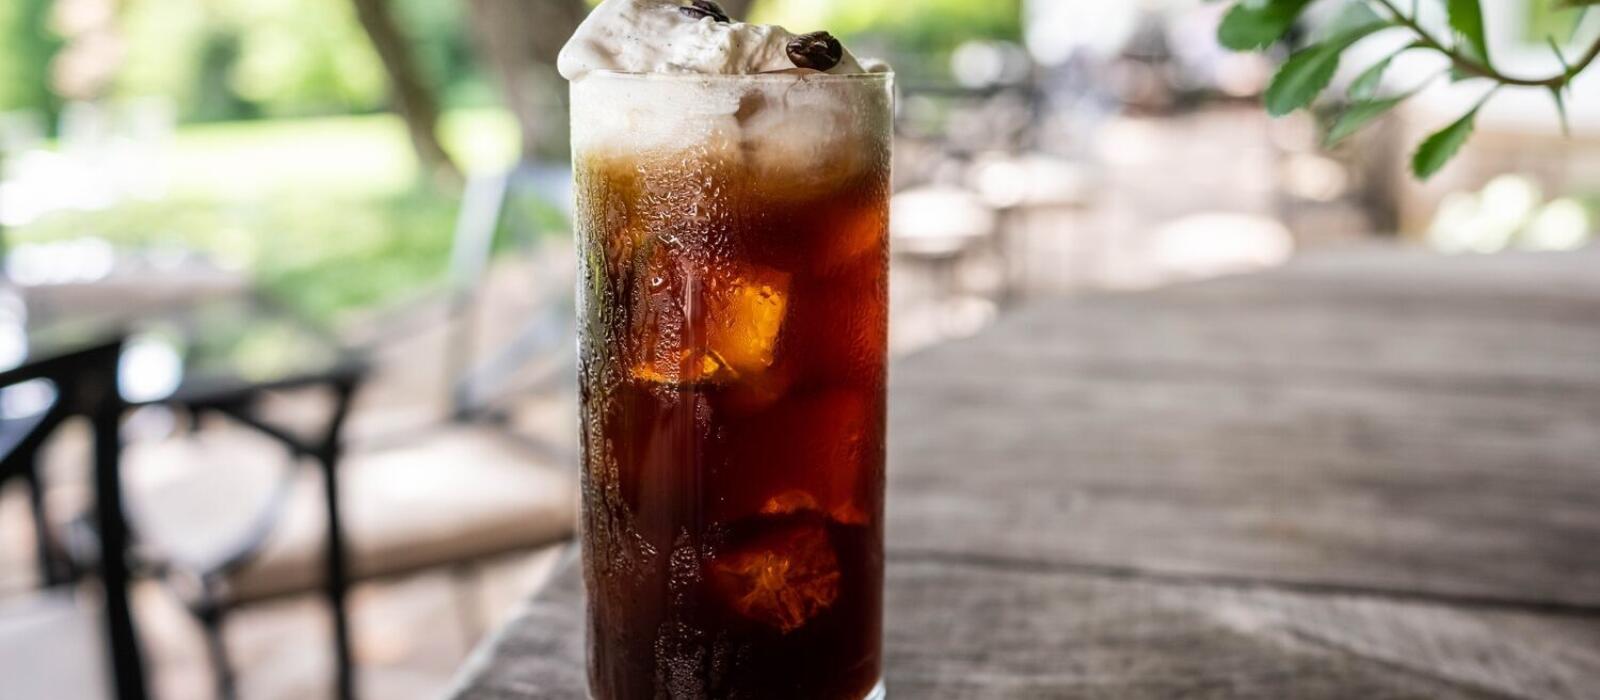 Knox Whiskey Works Cold Brew Coffee Liqueur